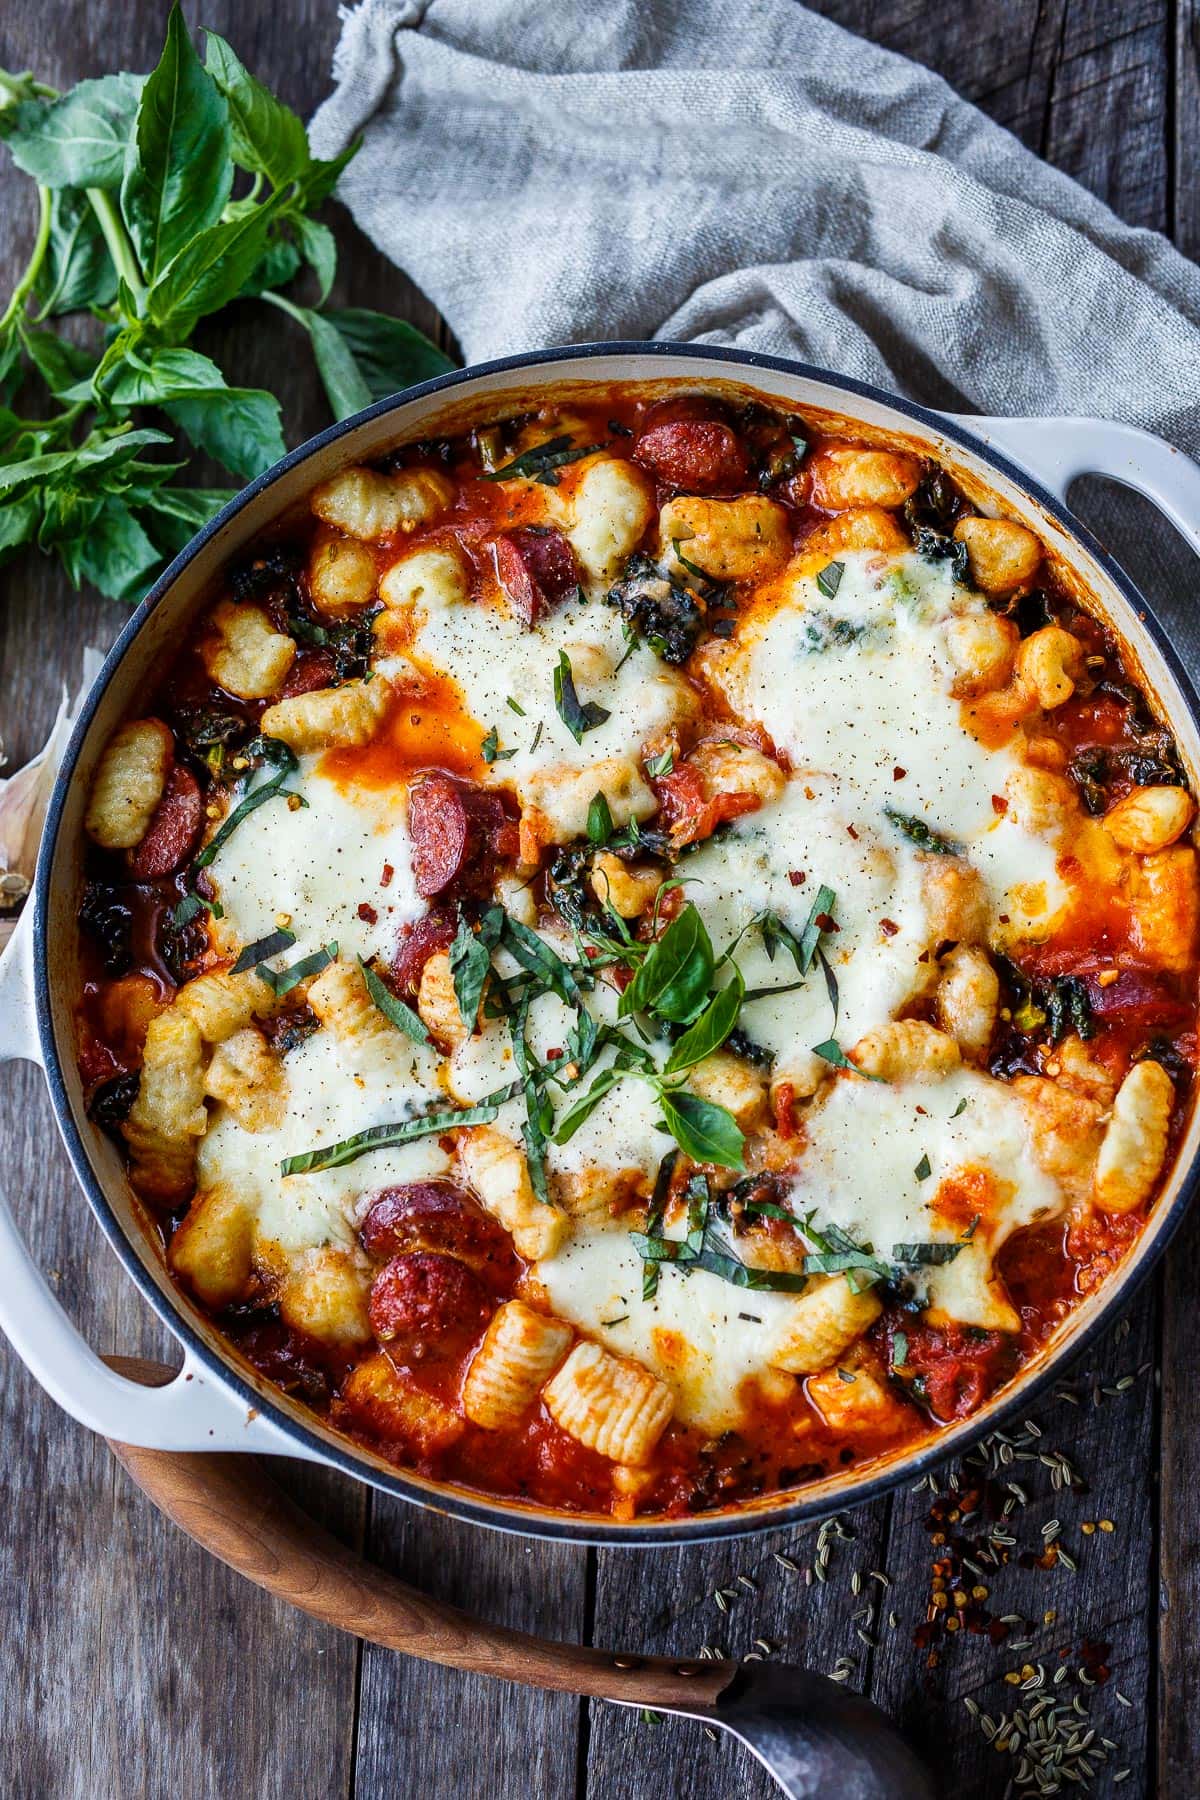 Baked gnocchi with tomato sauce, kale, Italian sausage, and melty mozzarella cheese - a delicious one-pot meal that can be made in 30 minutes. 